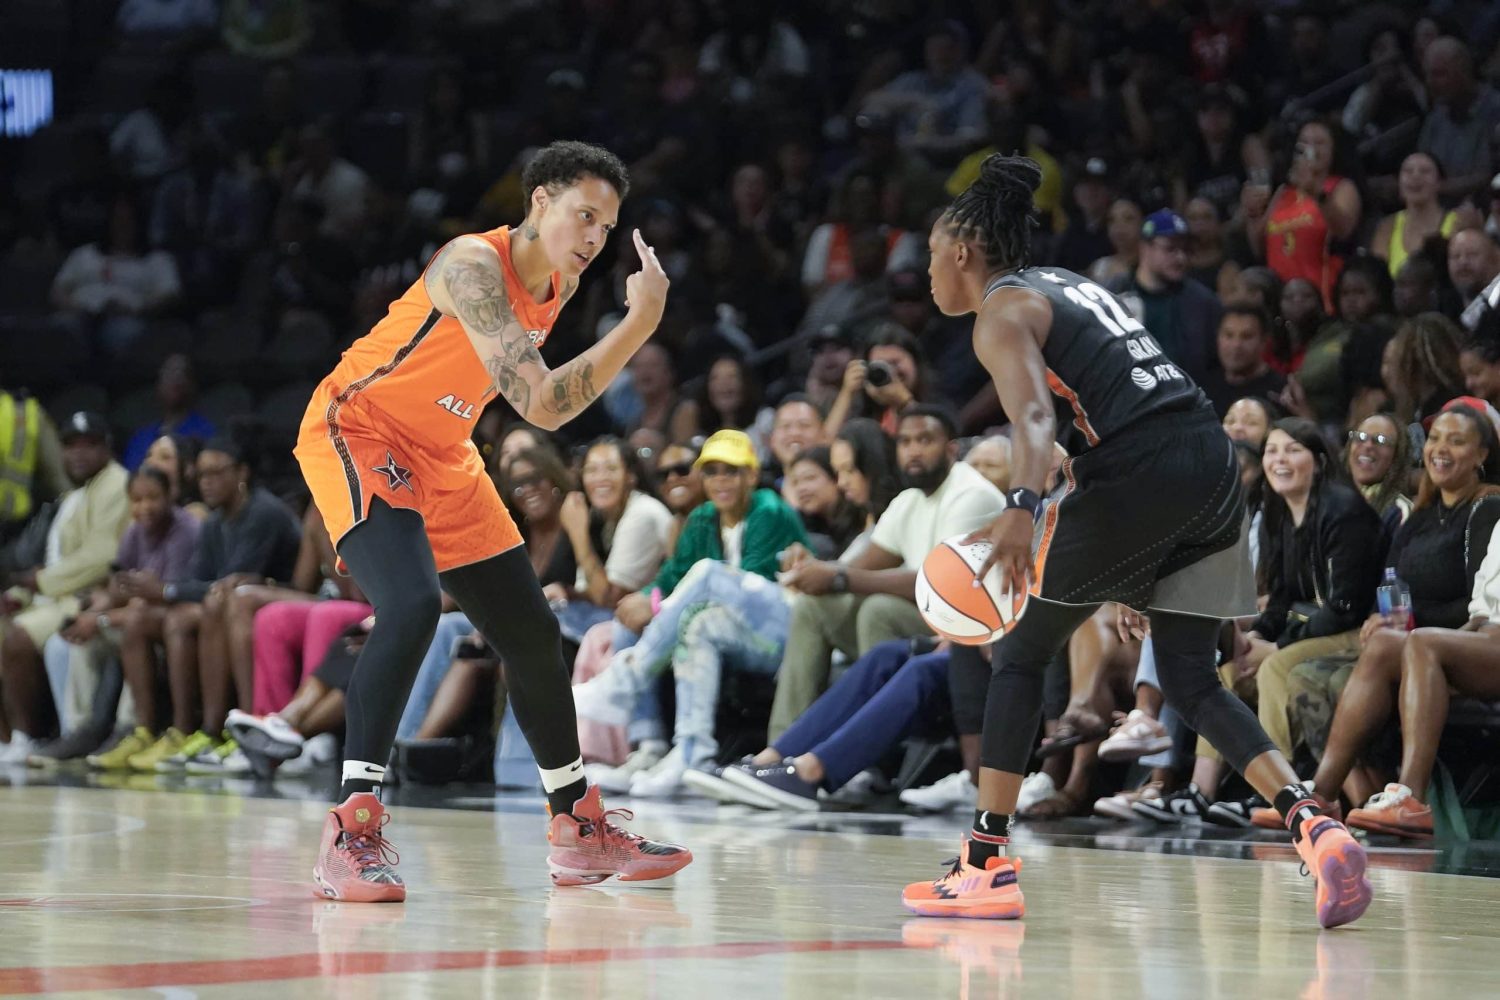 WNBA All-Star Game Draws Largest Audience in 16 Years